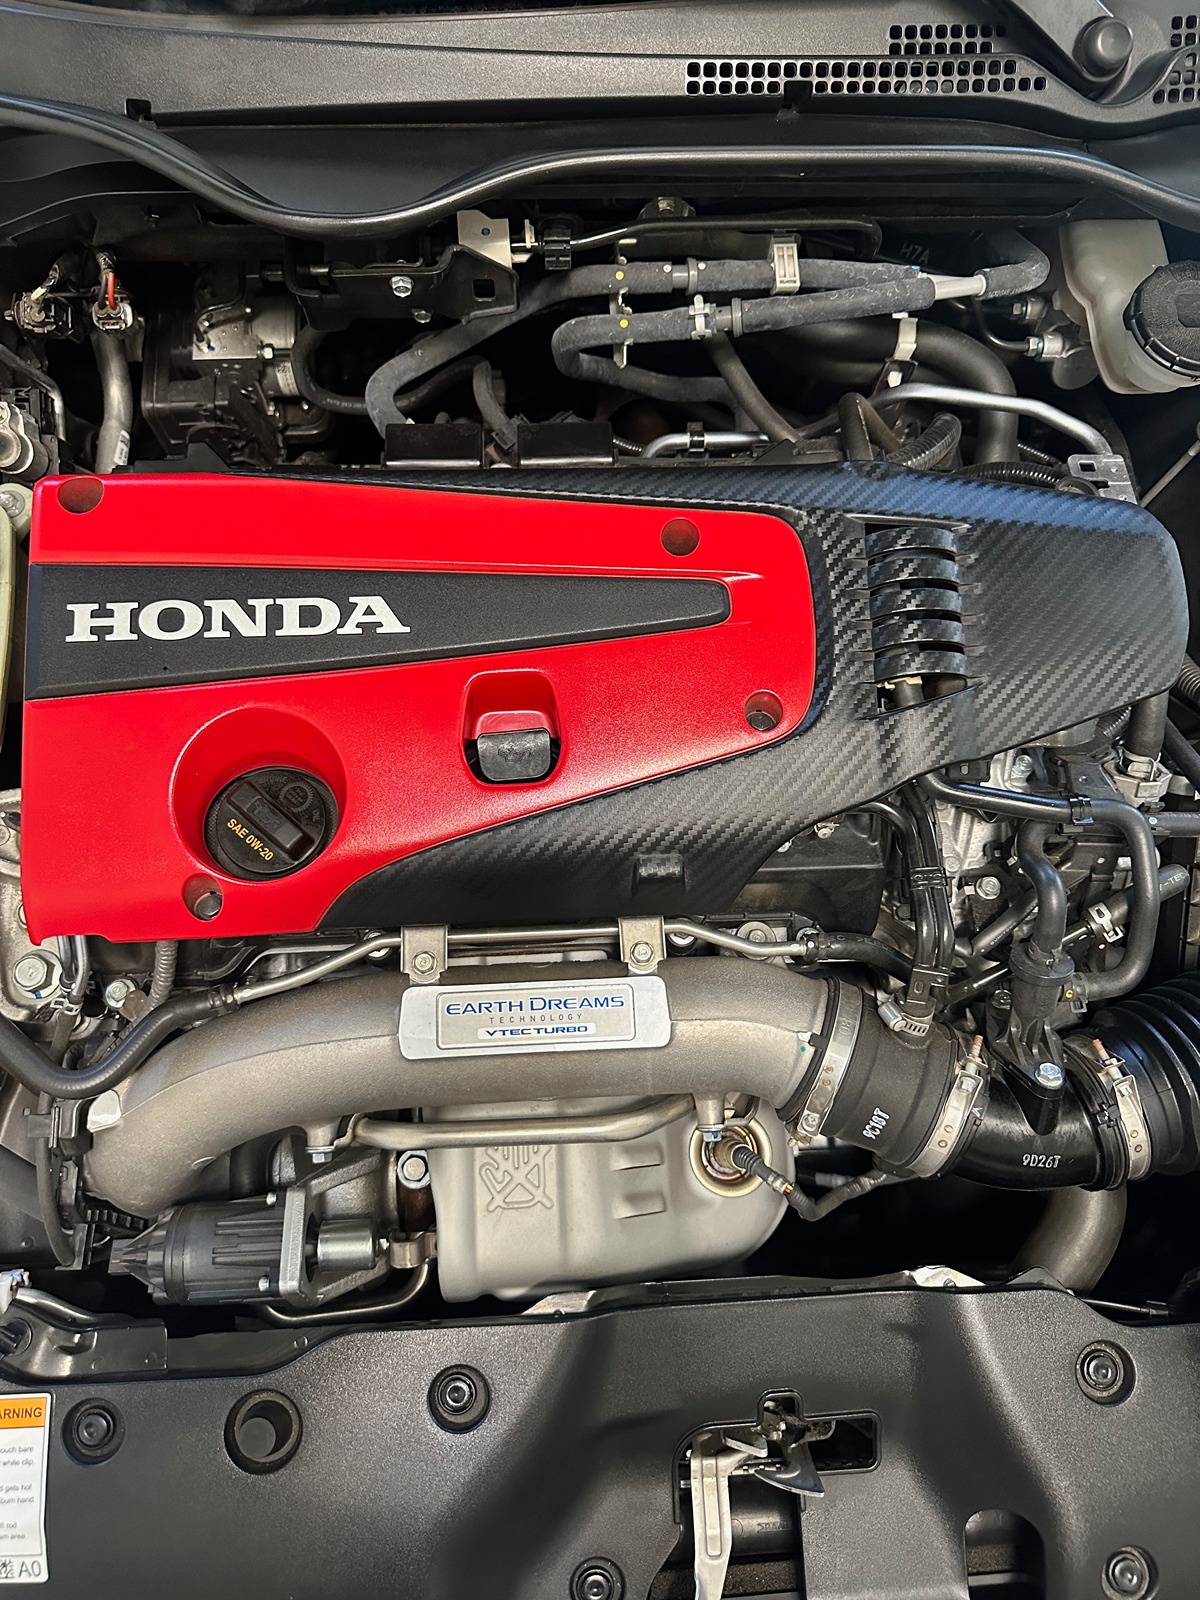 Honda Civic 10th gen Sold. 2019 Civic Type R for sale IMG_8208